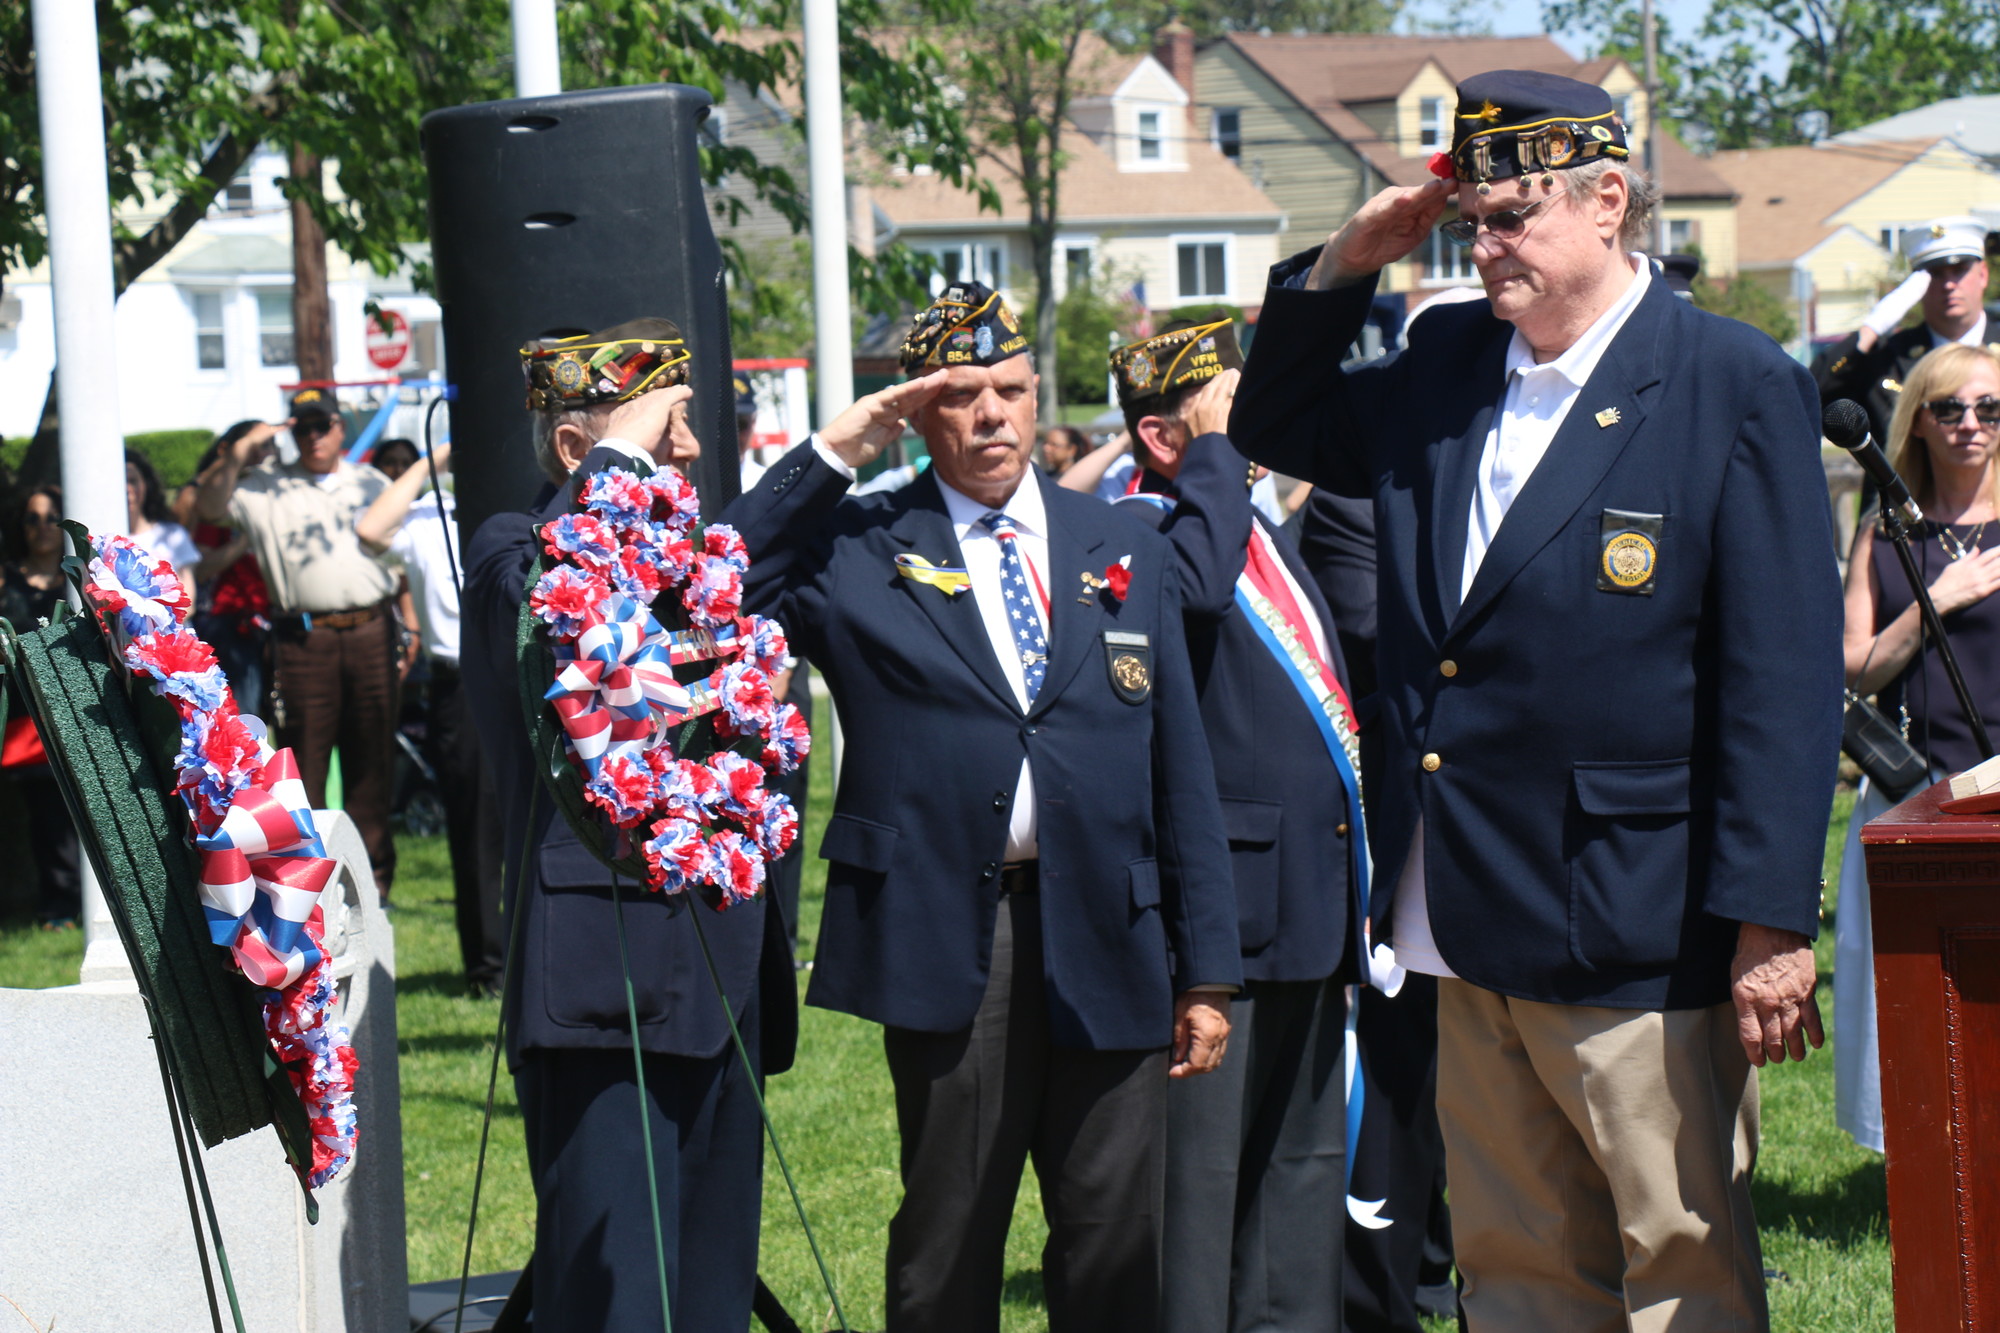 Summer weather and large crowds marked the annual commemoration.